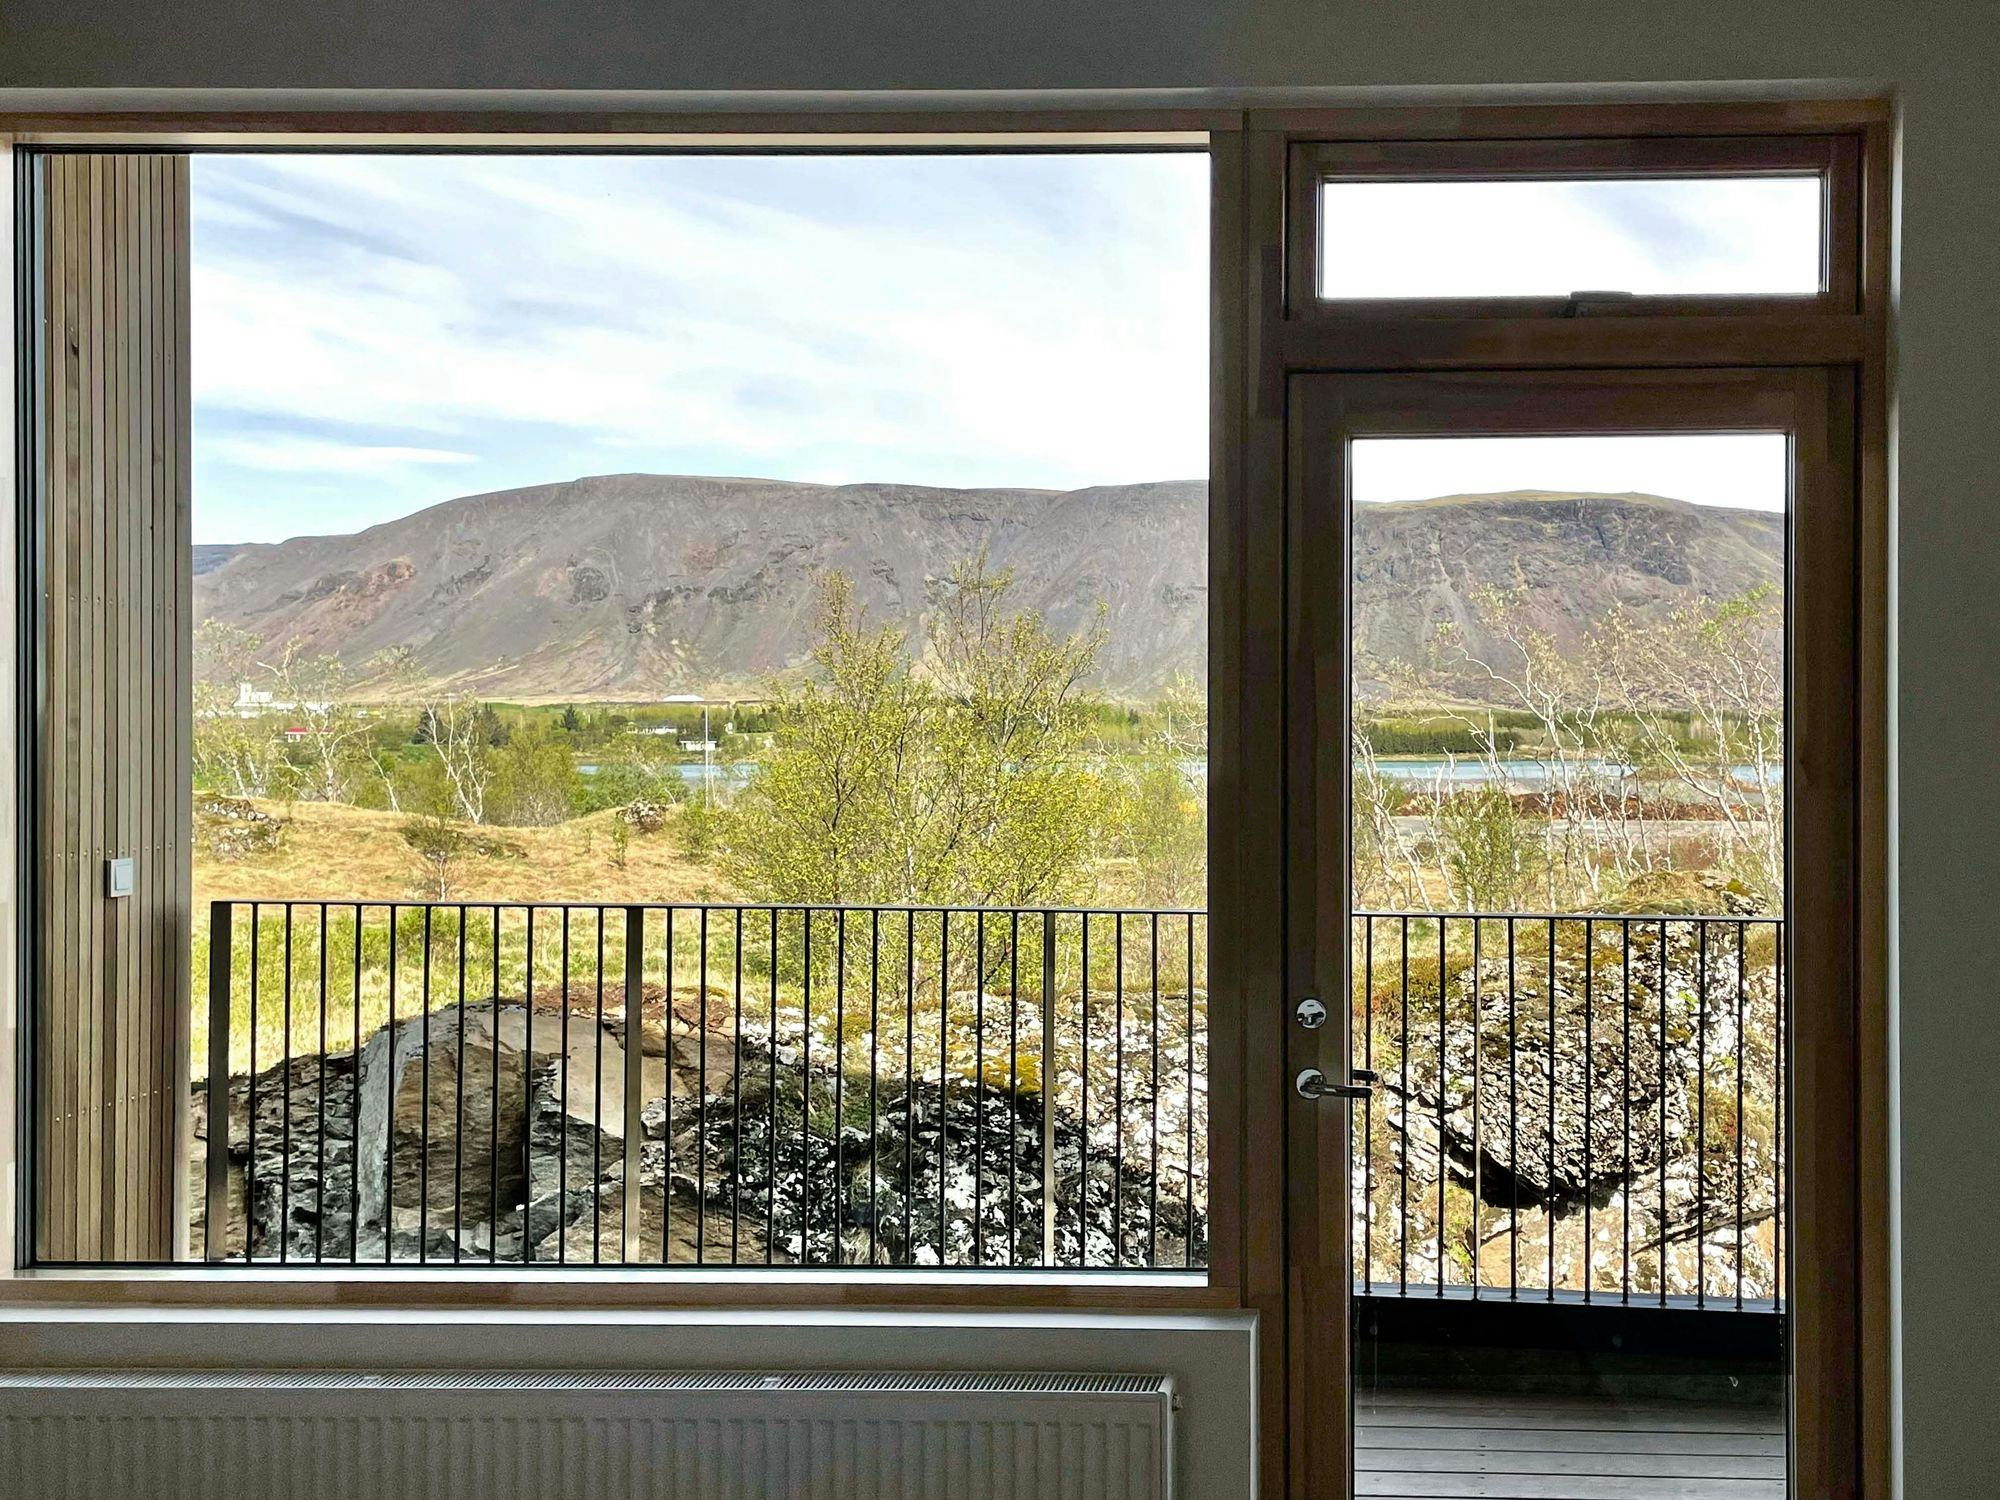 A scenic view of a mountainous landscape seen through a large window 